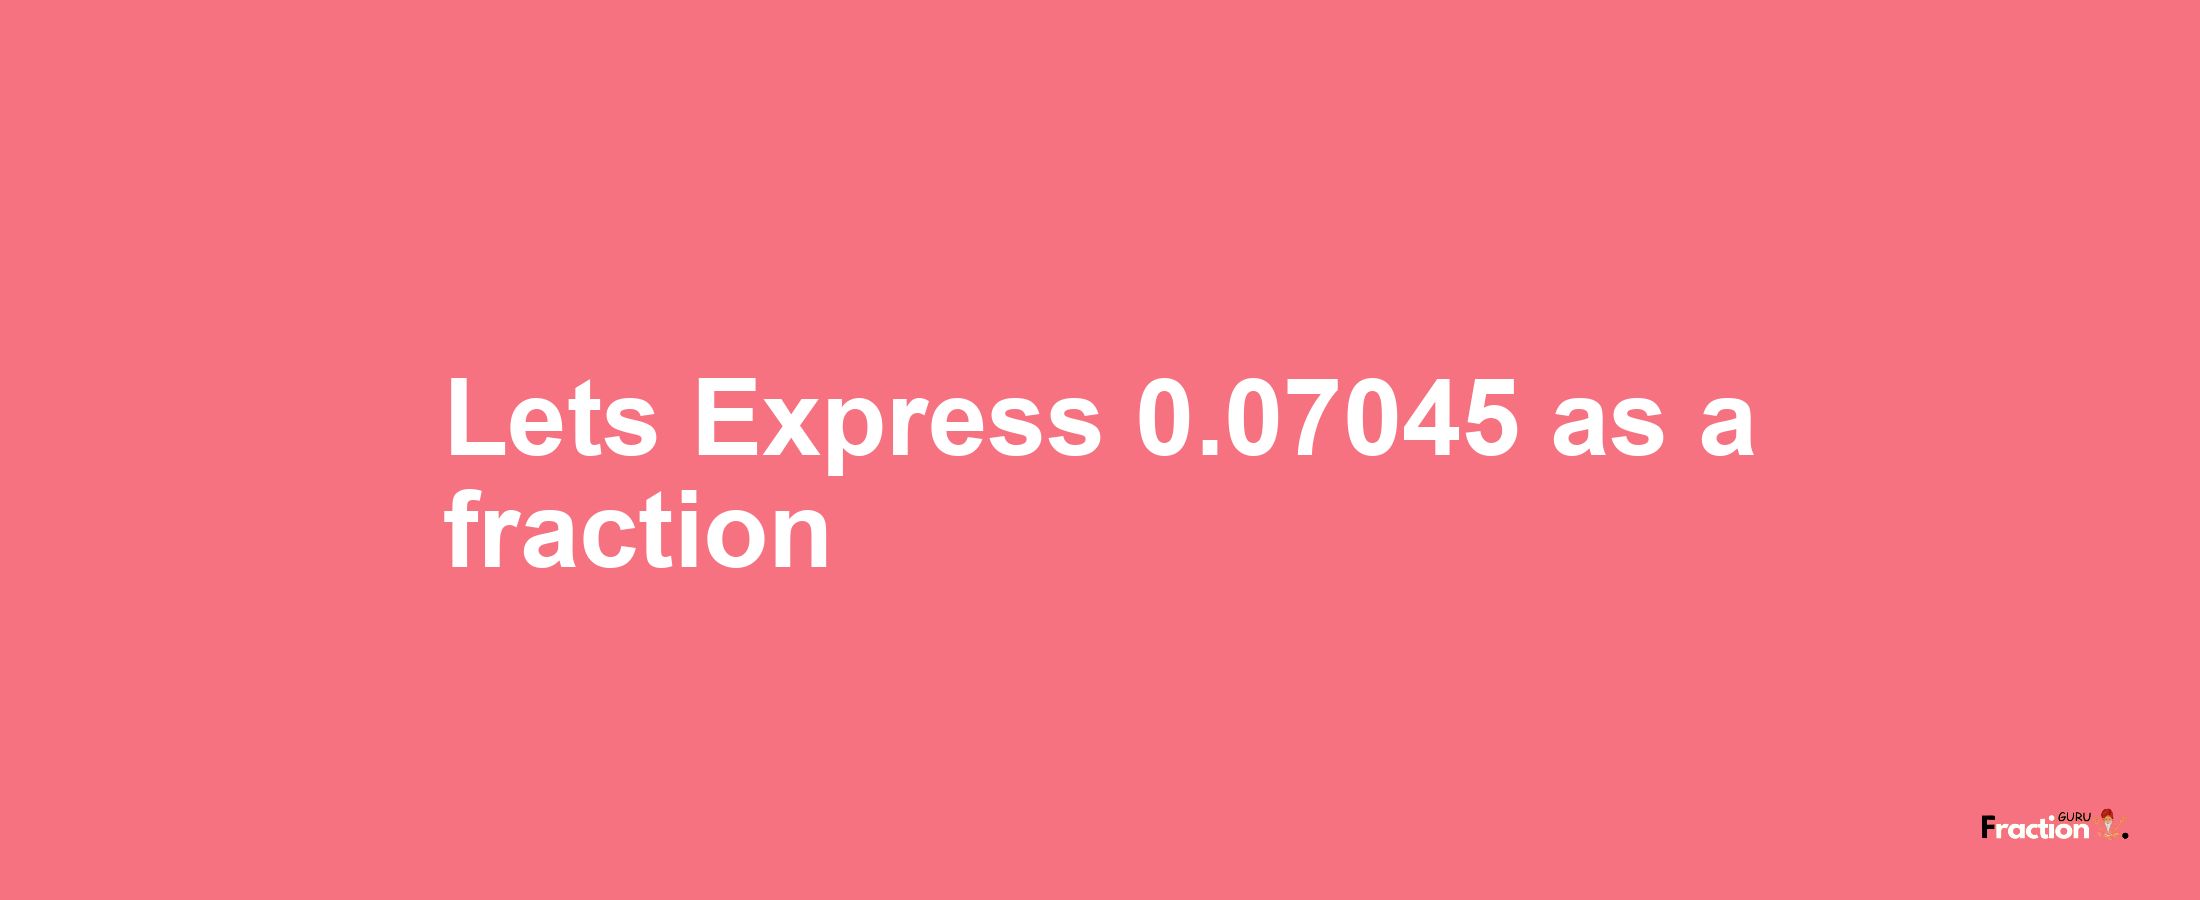 Lets Express 0.07045 as afraction